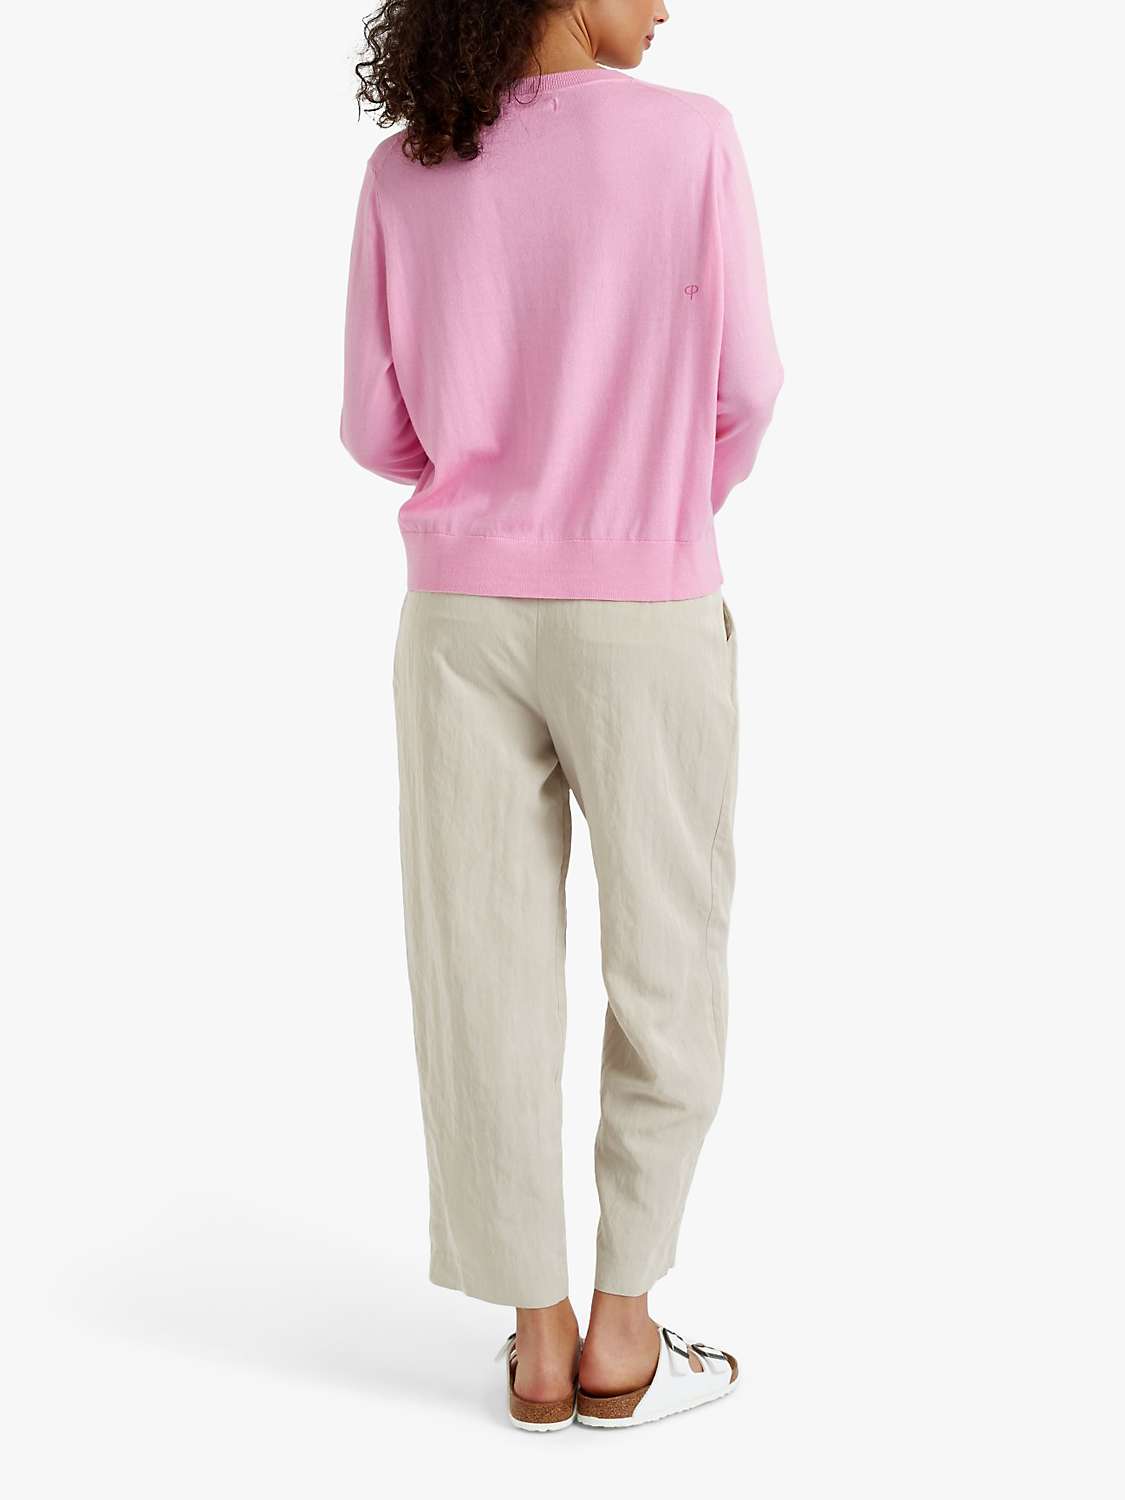 Buy Chinti & Parker Snoopy Jumper Online at johnlewis.com